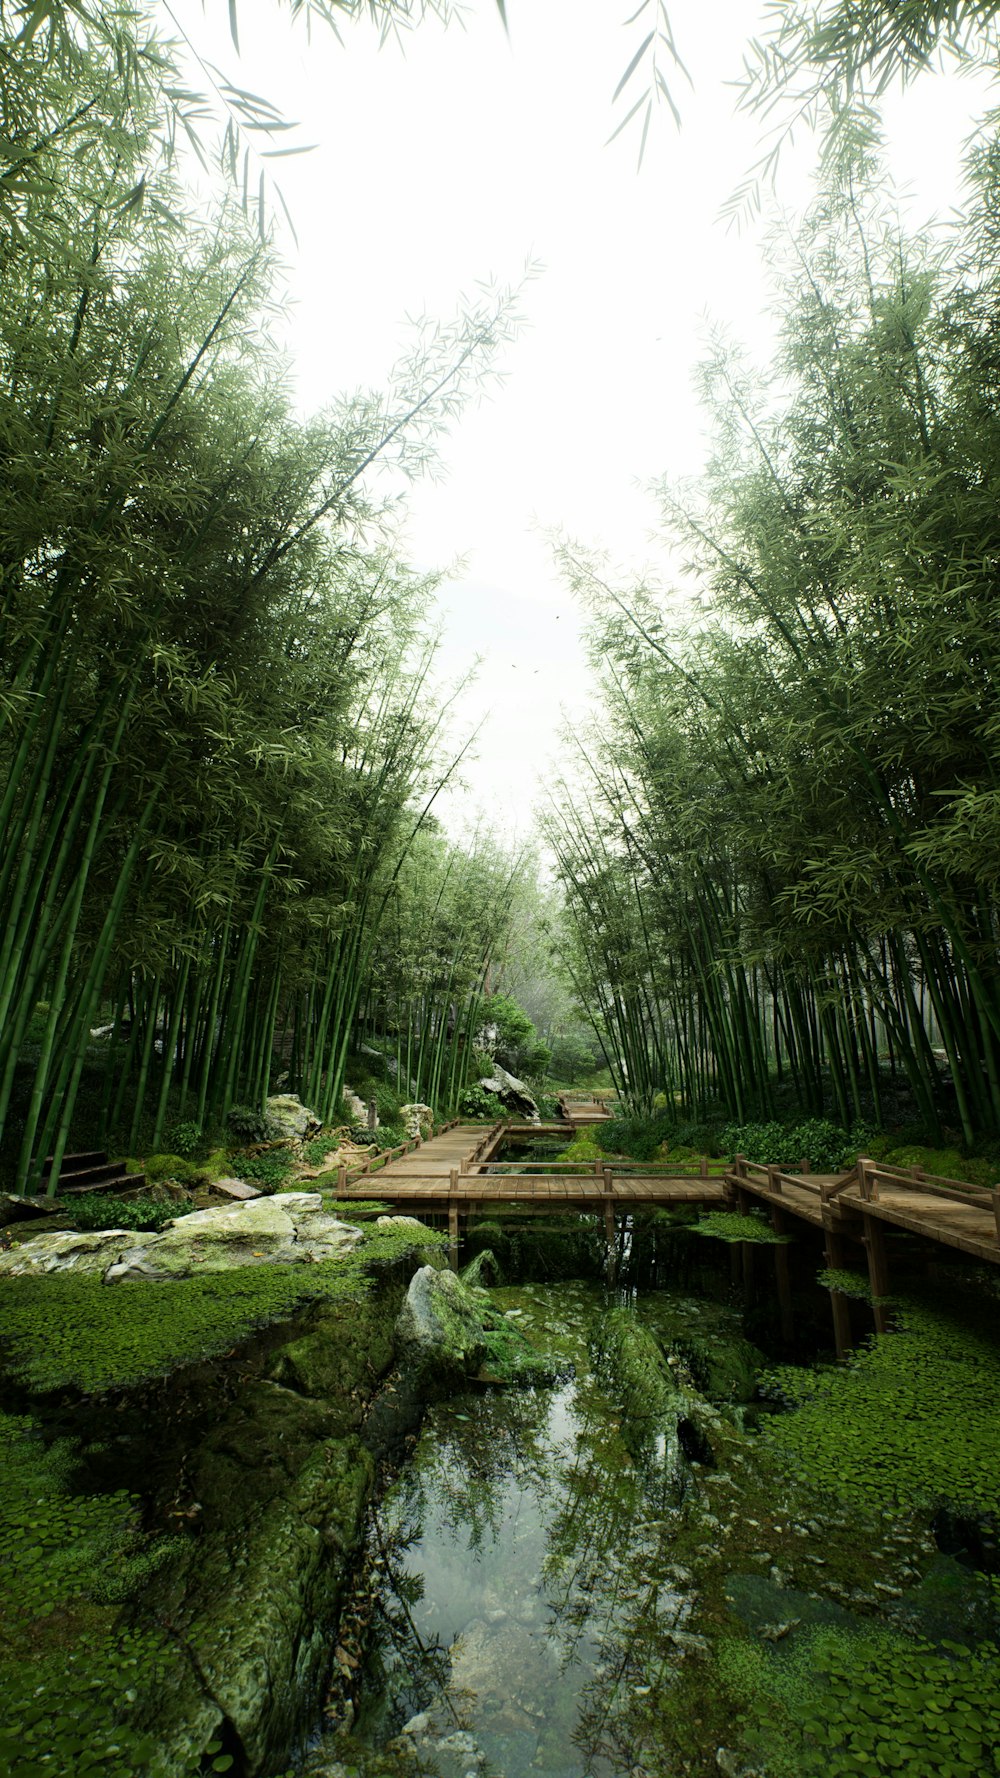 a pond surrounded by bamboo trees in a forest